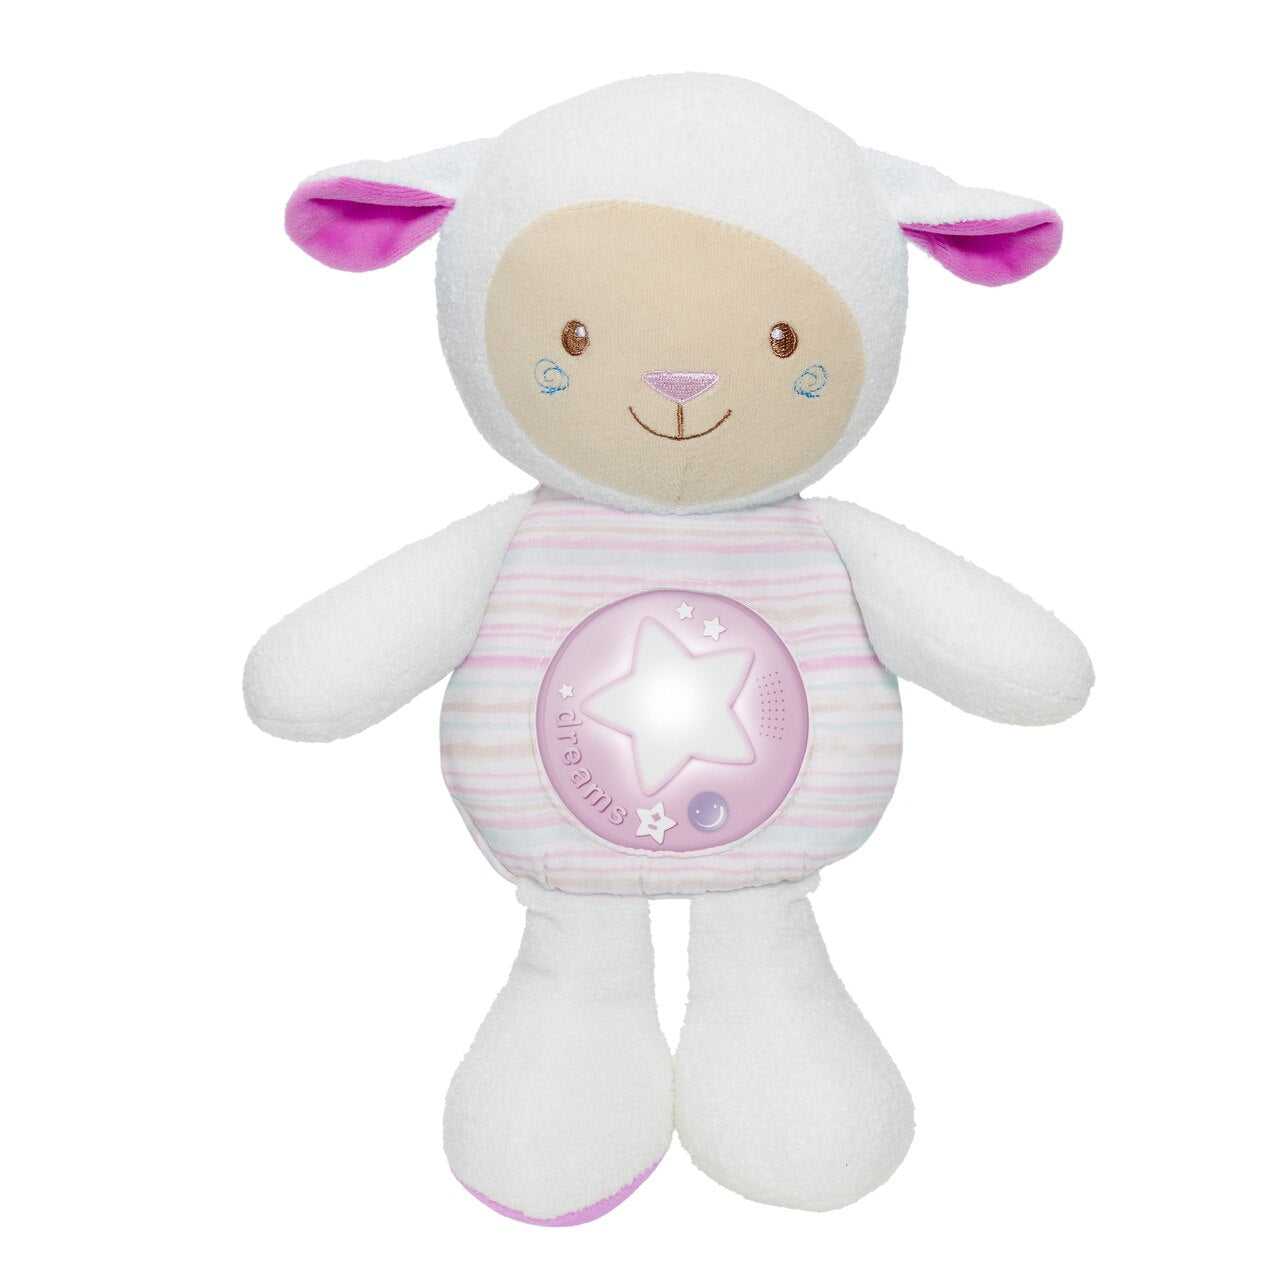 Chicco Lullaby Sheep Night Light PINK